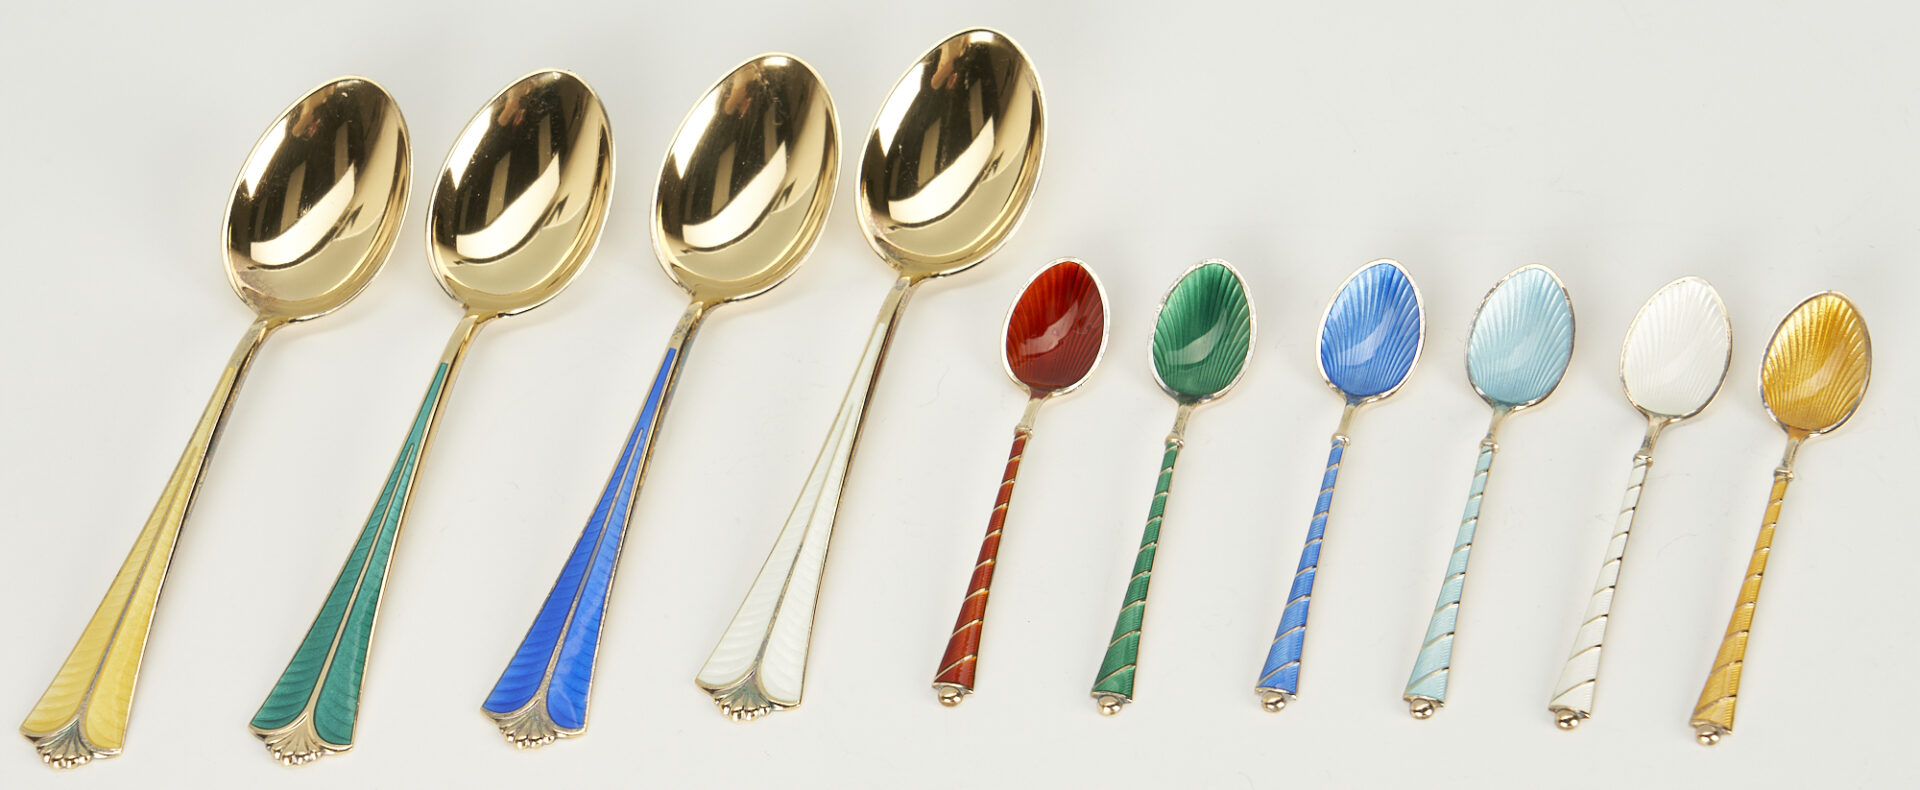 Lot 728: 30 Assorted Enameled Silver & Silver Items, incl. David Anderson